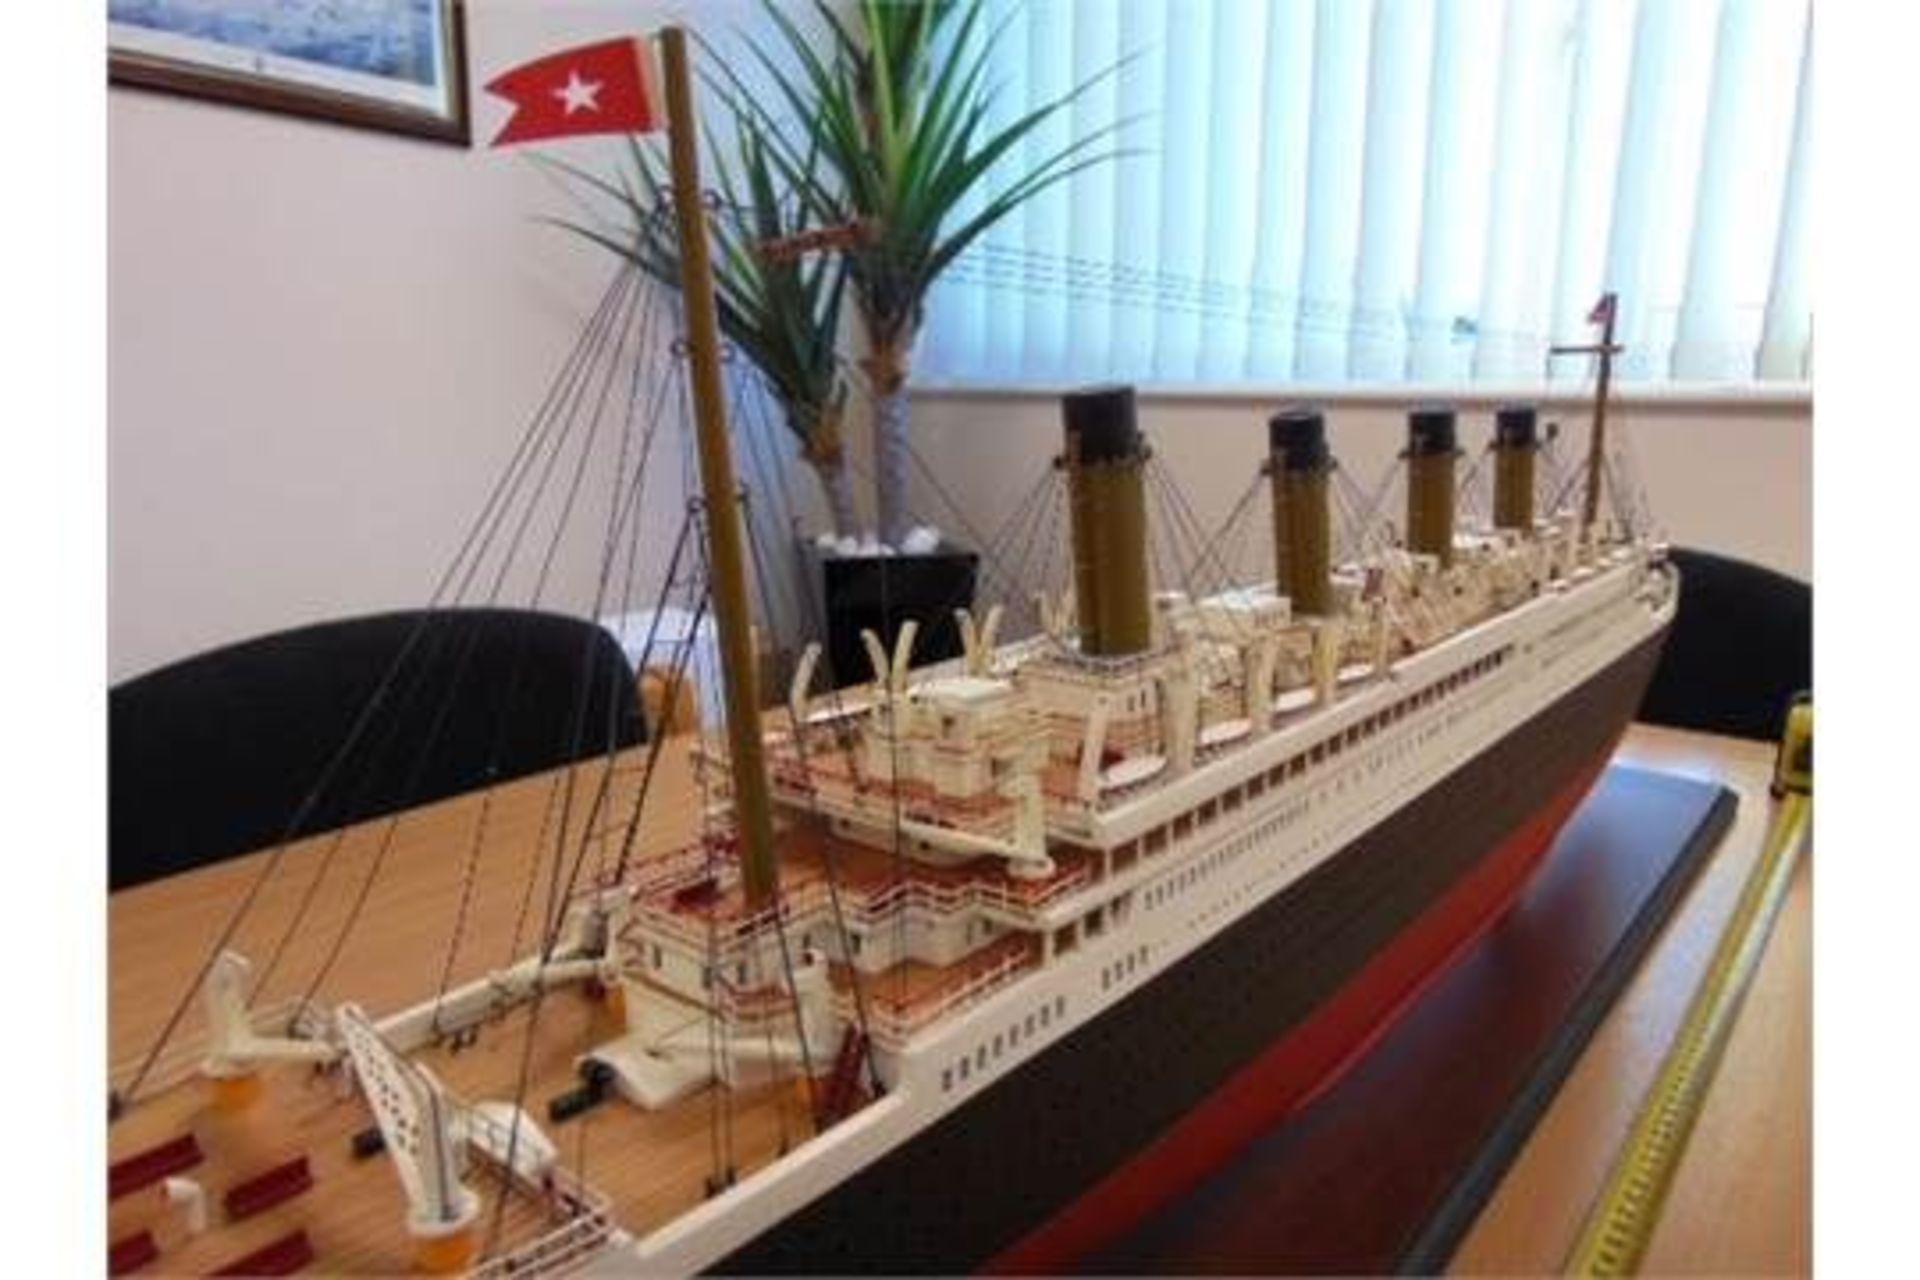 RMS TITANIC HIGHLY DETAILED WOOD SCALE MODEL - Image 7 of 11